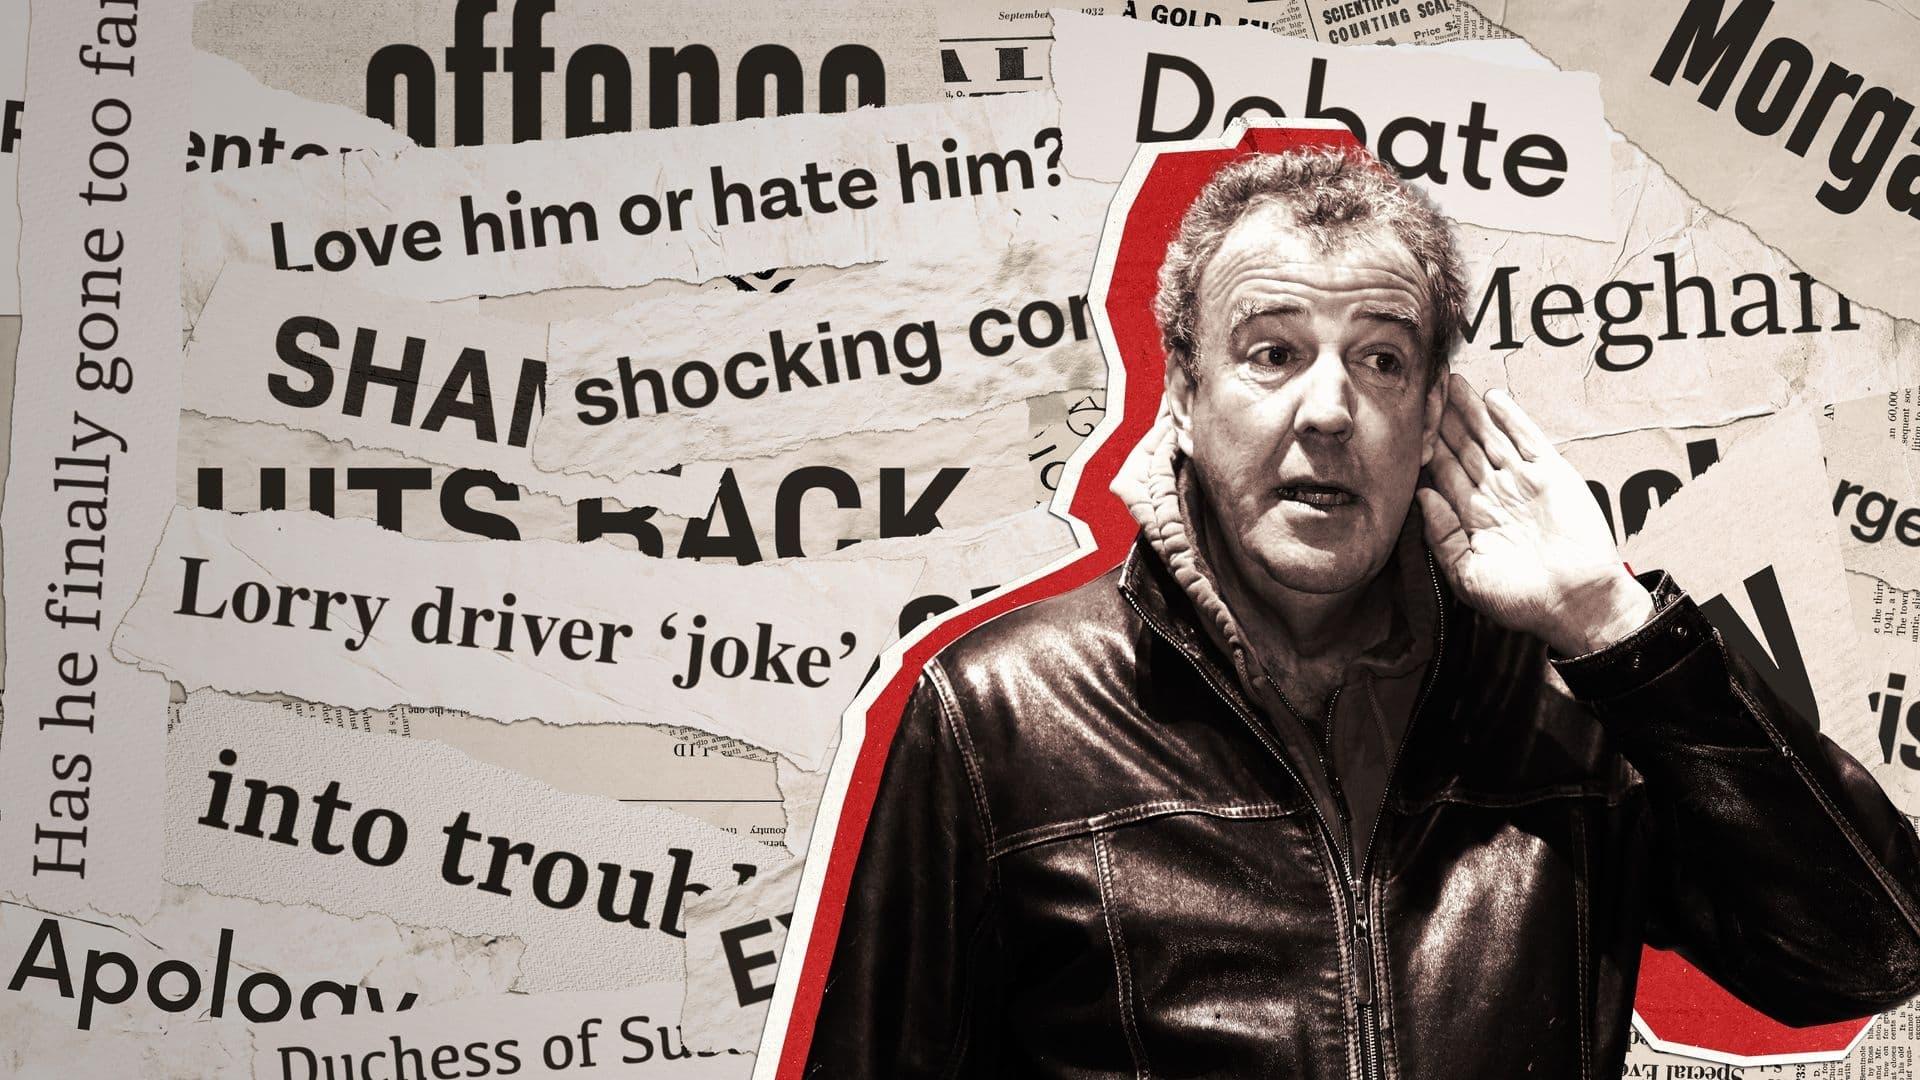 Jeremy Clarkson: King of Controversy backdrop